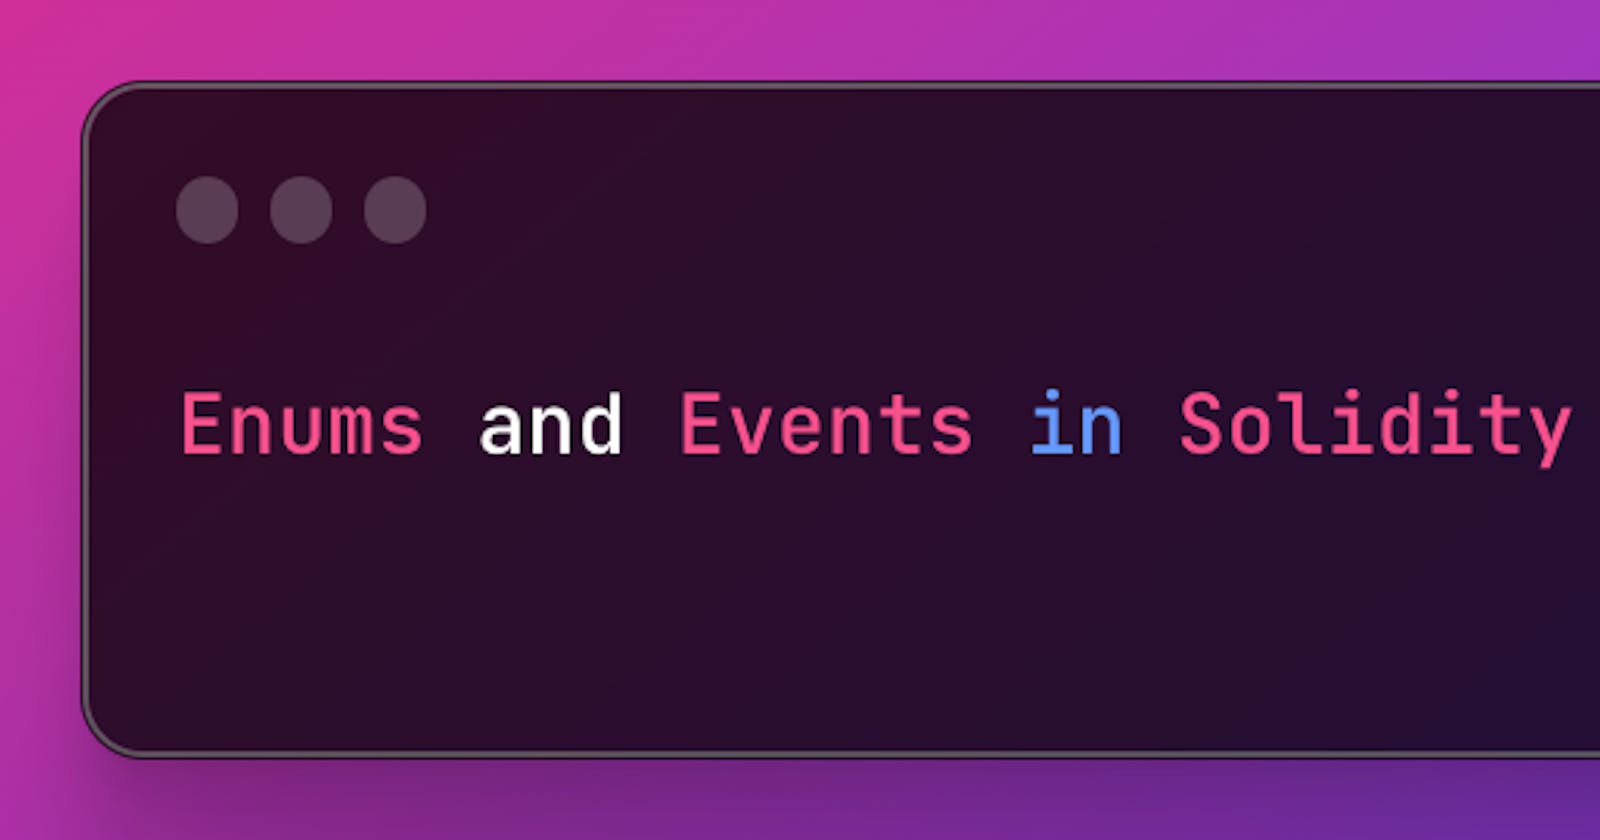 Enums and Events in Solidity